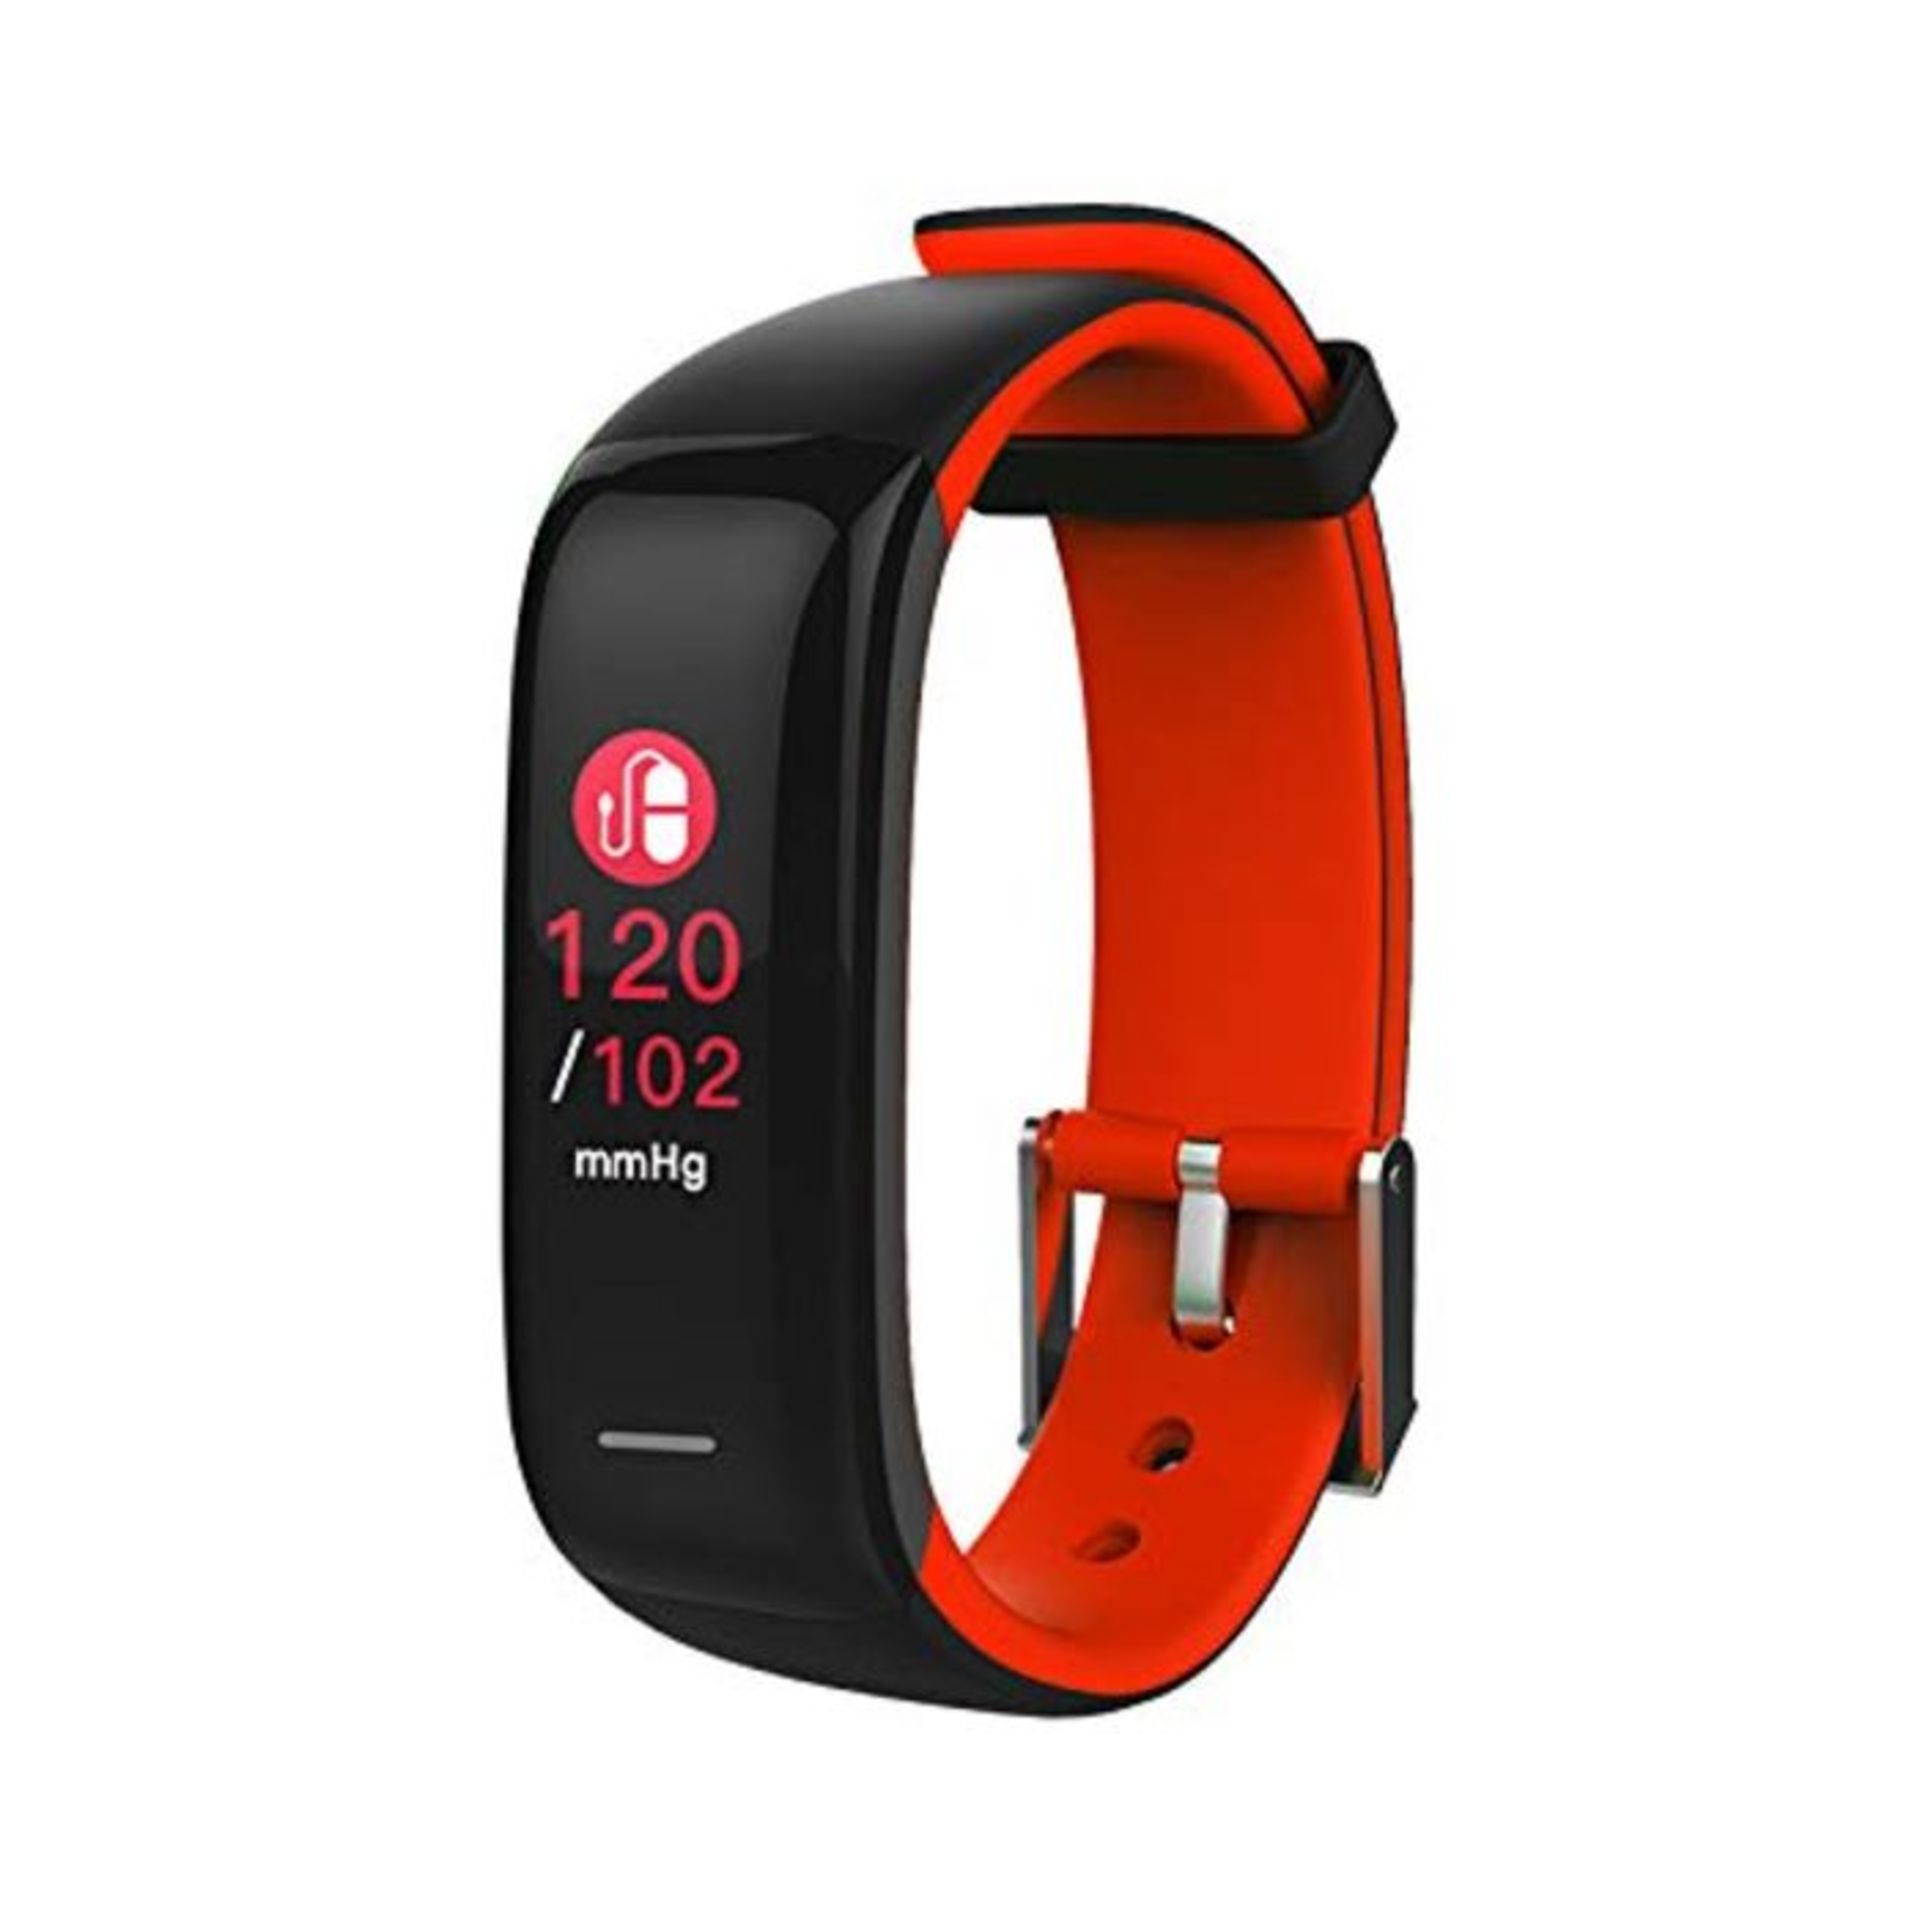 novasmart - runR II Fitness Tracker, Activity Tracker, Smart Band with Colour Display,